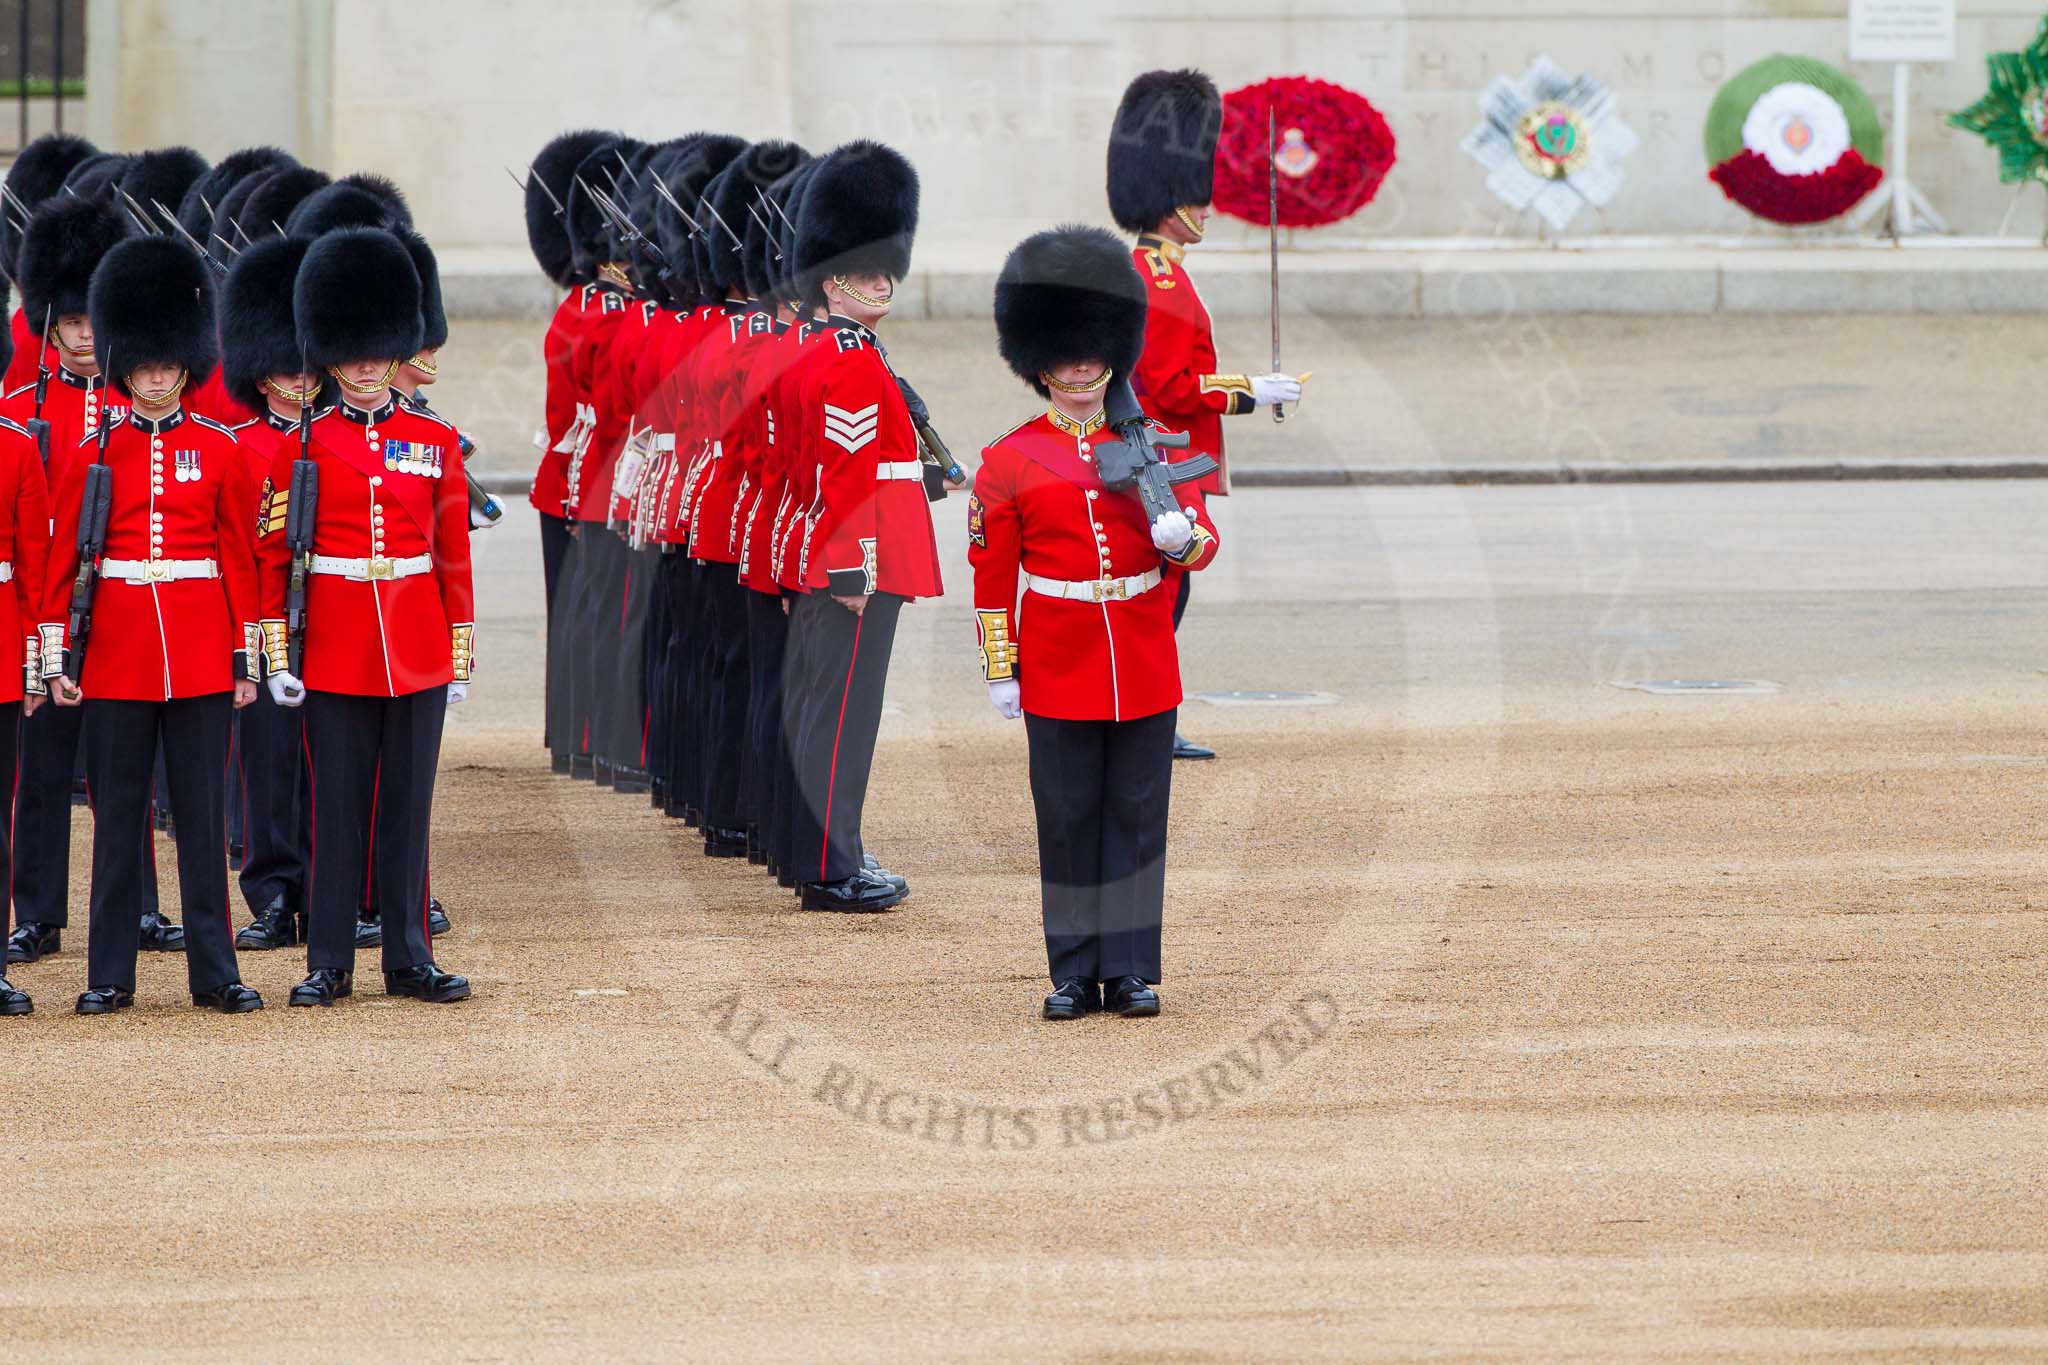 Major General's Review 2013: No. 3 Guard, 1st Battalion Welsh Guards, at the gap in the line for members of the Royal Family..
Horse Guards Parade, Westminster,
London SW1,

United Kingdom,
on 01 June 2013 at 10:44, image #188